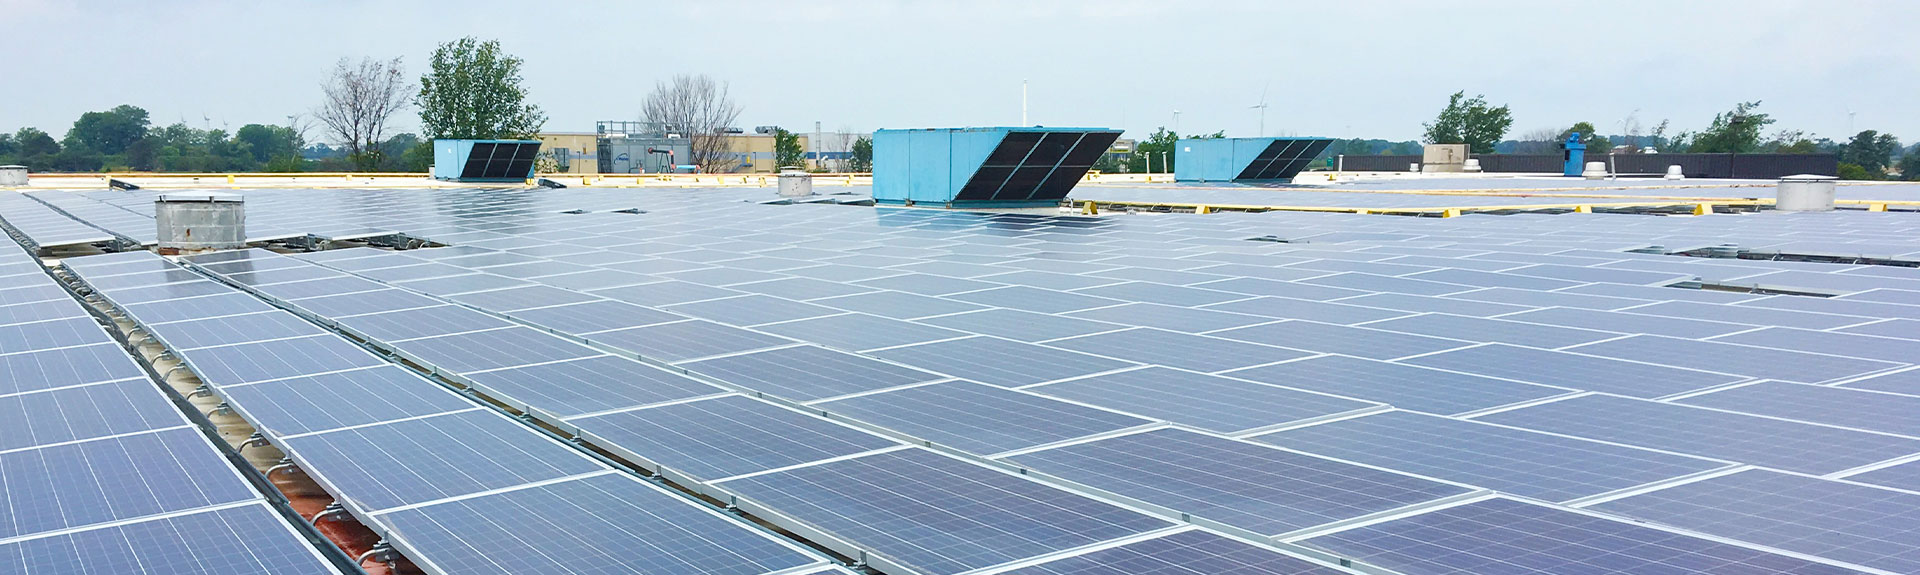 A rooftop solar array in Cambridge, Ontario, owned by Skyline Clean Energy Fund.